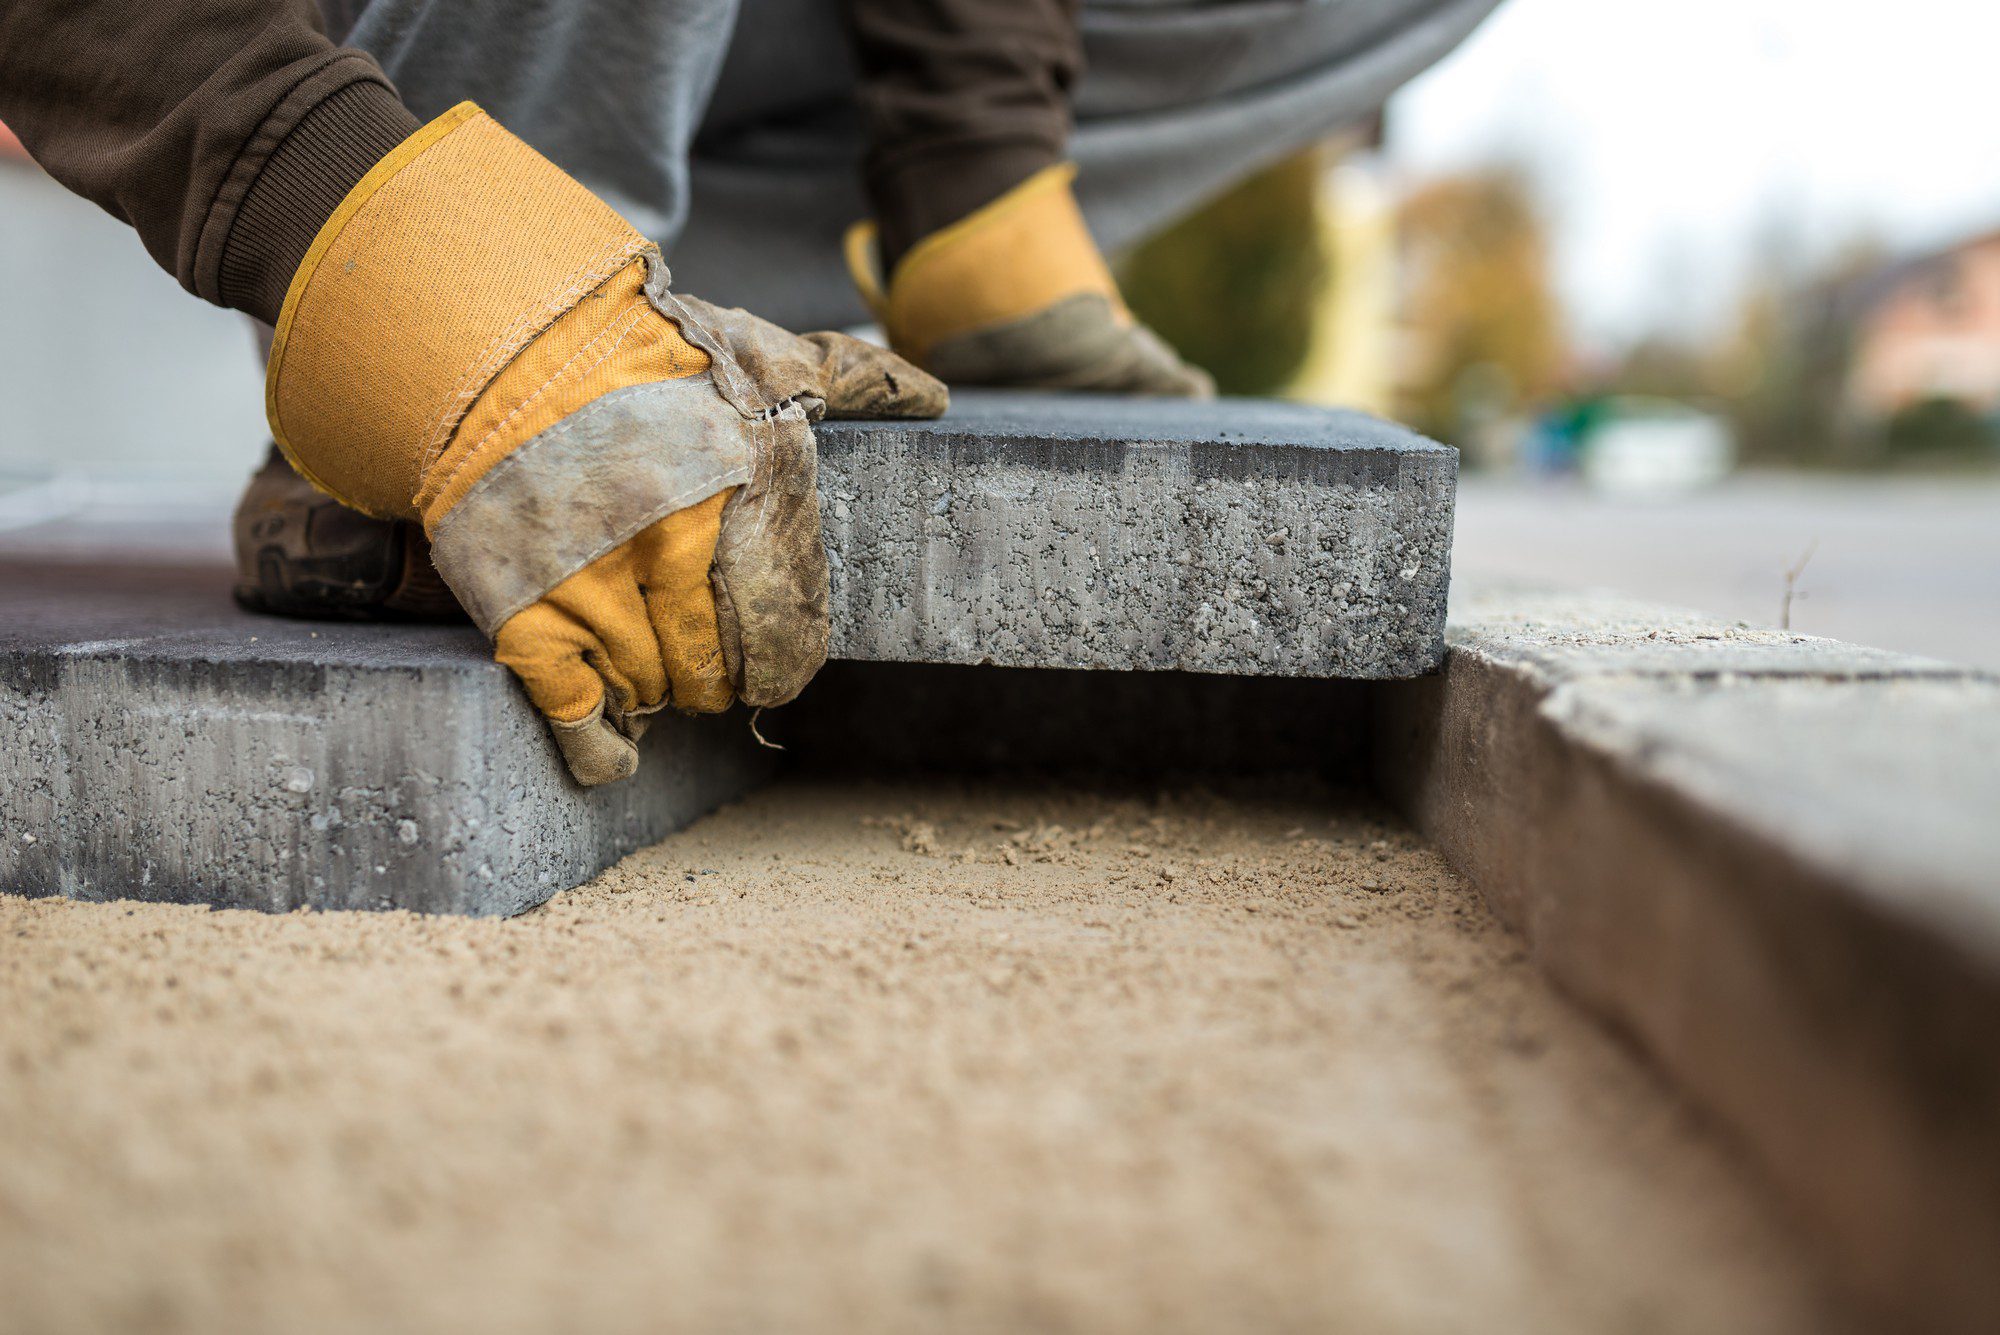 The image shows a close-up of a person's hands wearing heavy-duty, yellow work gloves while handling a concrete block or paver. The person seems to be working on paving or landscaping, as the concrete block is being placed on a bed of sand, which is typically done to ensure a level and stable base for pavement or hardscaping projects. The focus is primarily on the hands and the concrete block, emphasizing the manual and physical aspect of the work being done. The background is blurred, which helps to draw attention to the action taking place in the foreground.